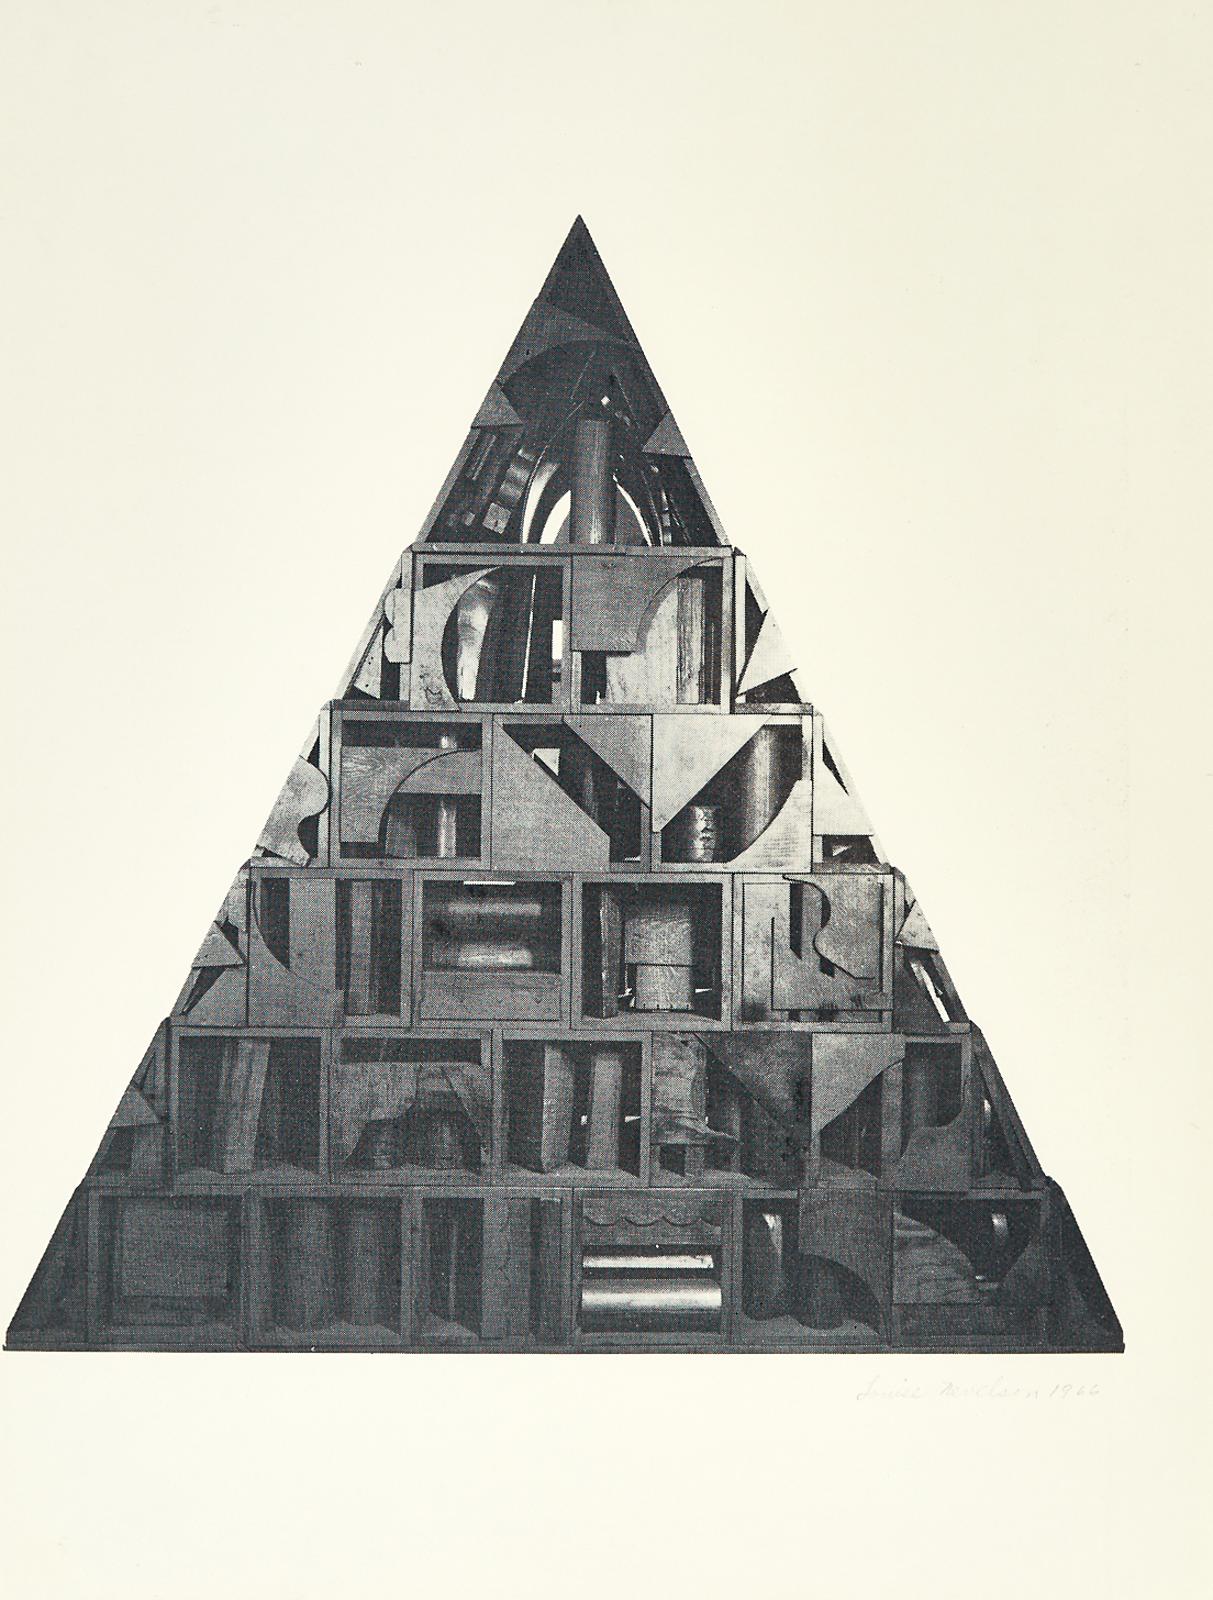 Louise Nevelson (1899-1988) - Four In The Morning; Nursery Rhyme, Two Works From The 